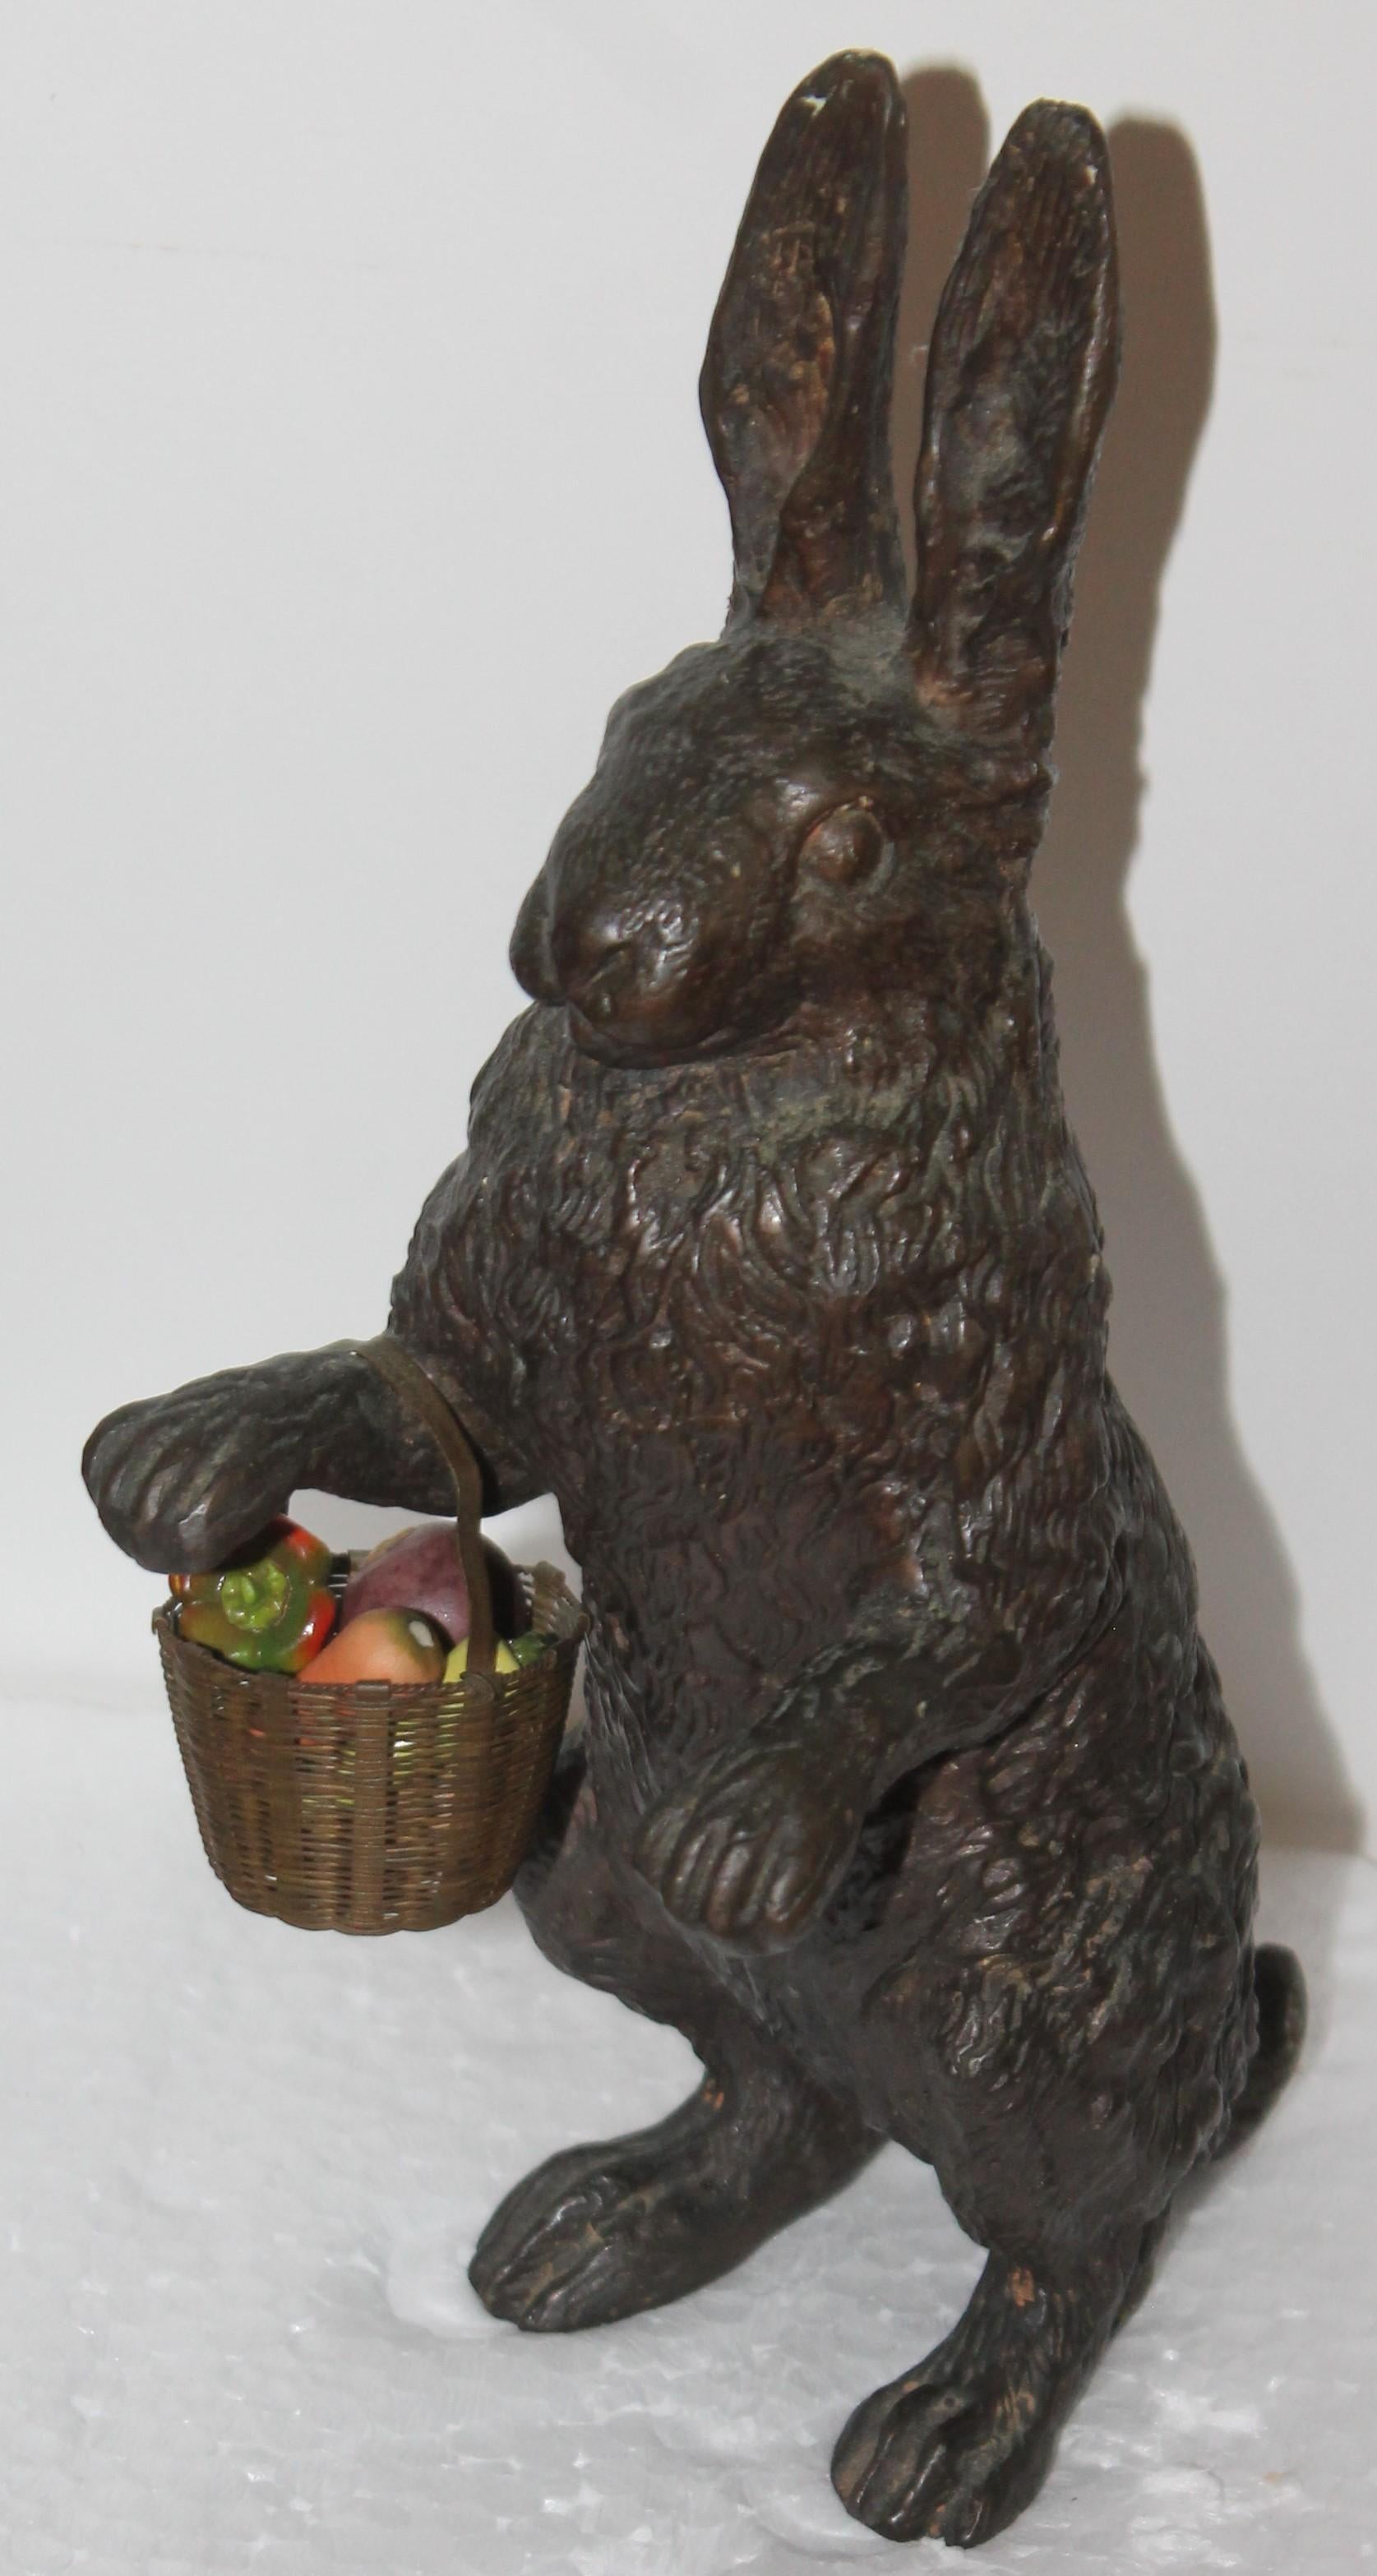 19th century bronze rabbit in fine condition with a brass basket of alabaster fruit. The condition is very good. The rabbit has a amazing aged patina.